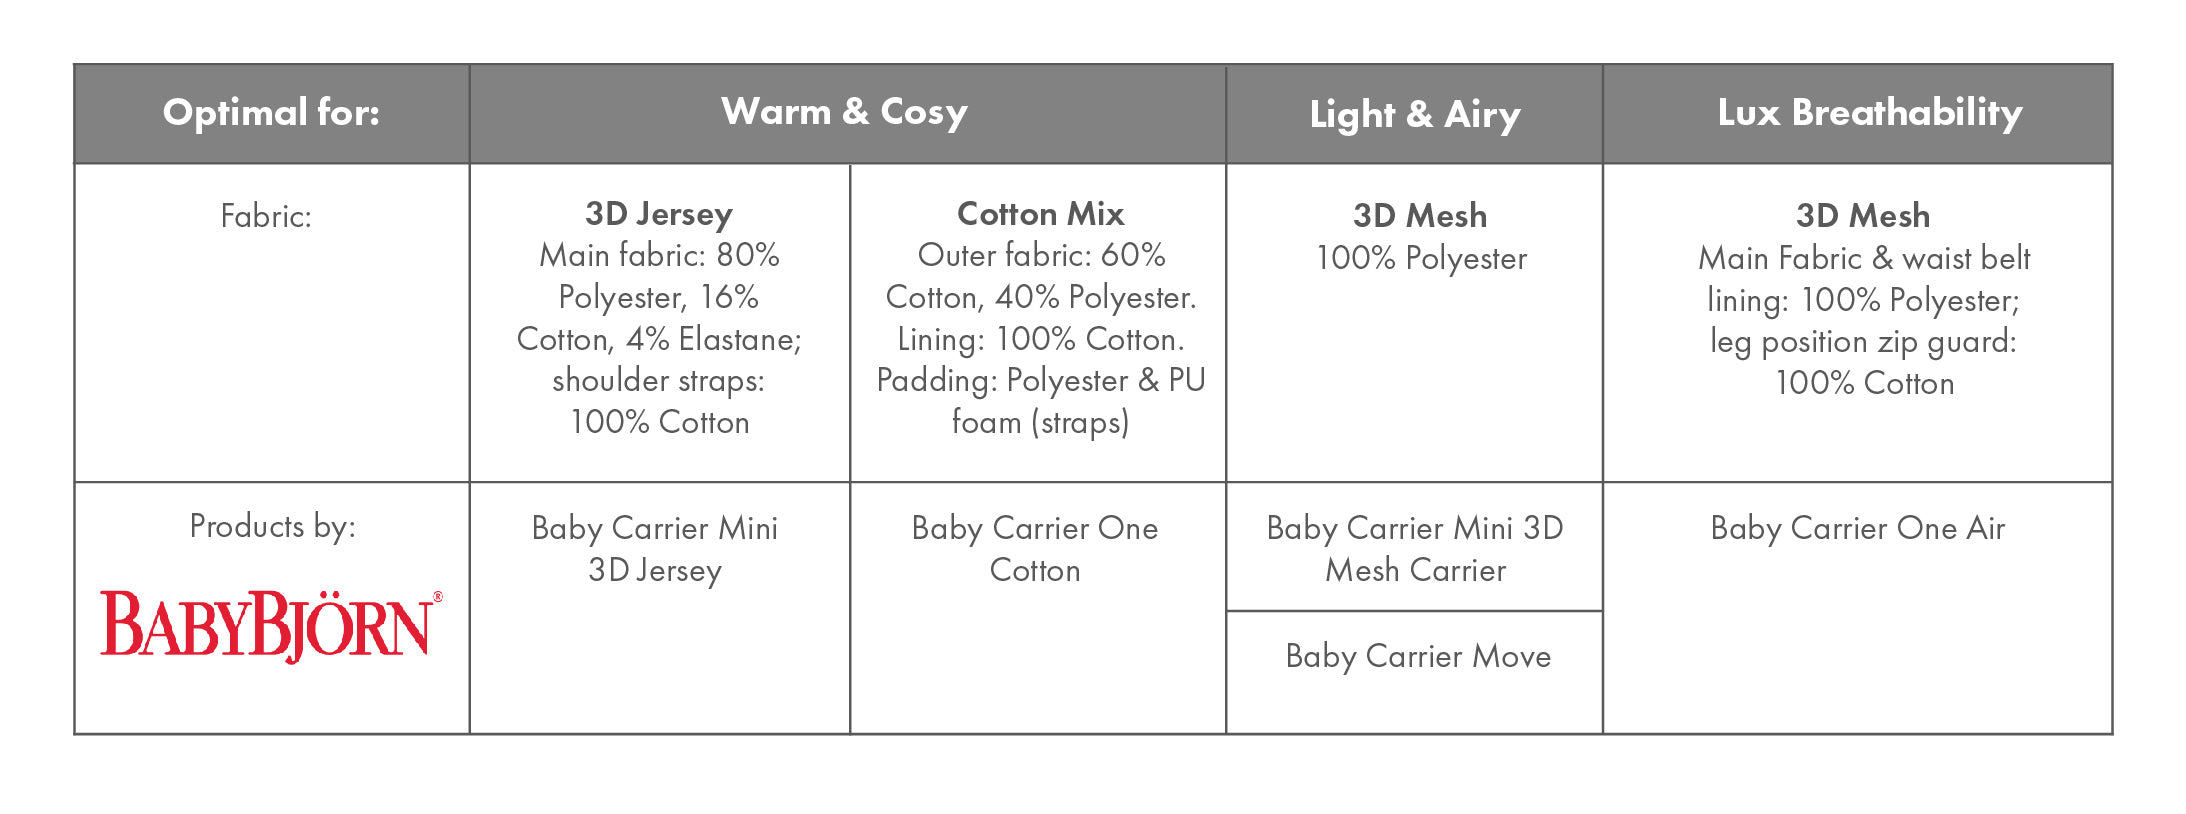 Fabrics / Materials of the BabyBjorn carriers on Belly Beyond.